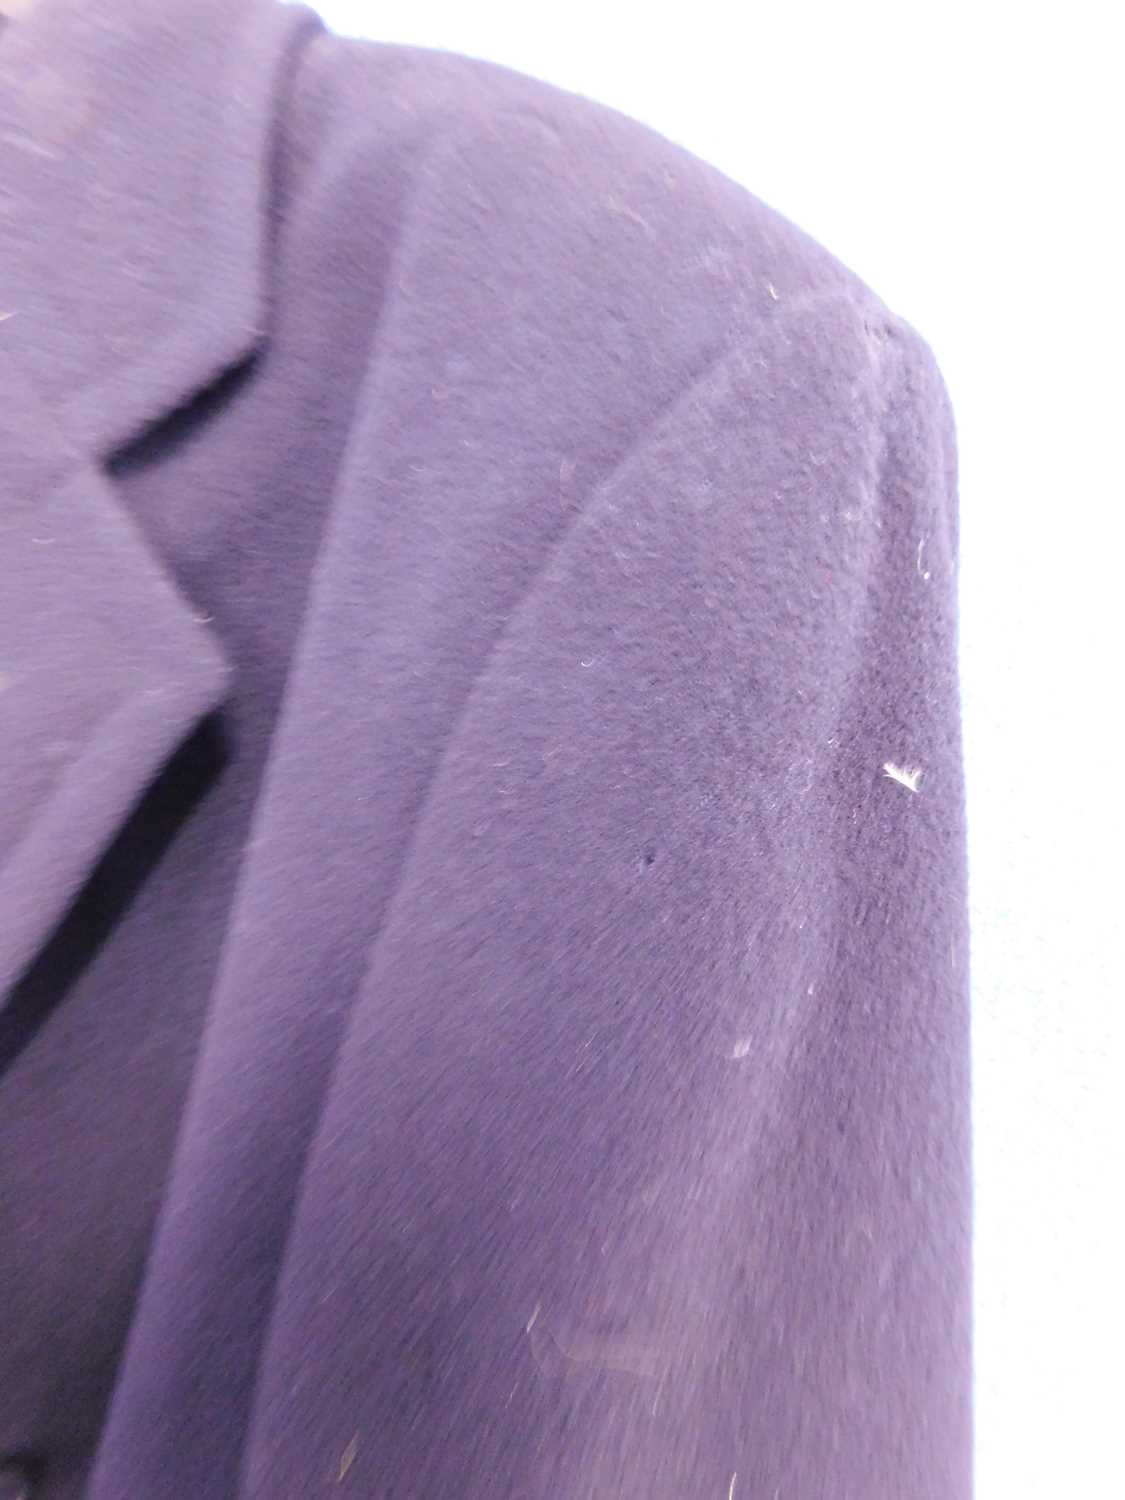 A gentlemans wool and cashmere coat by David Moss, in navy blue, double breasted with belt, size - Image 5 of 5